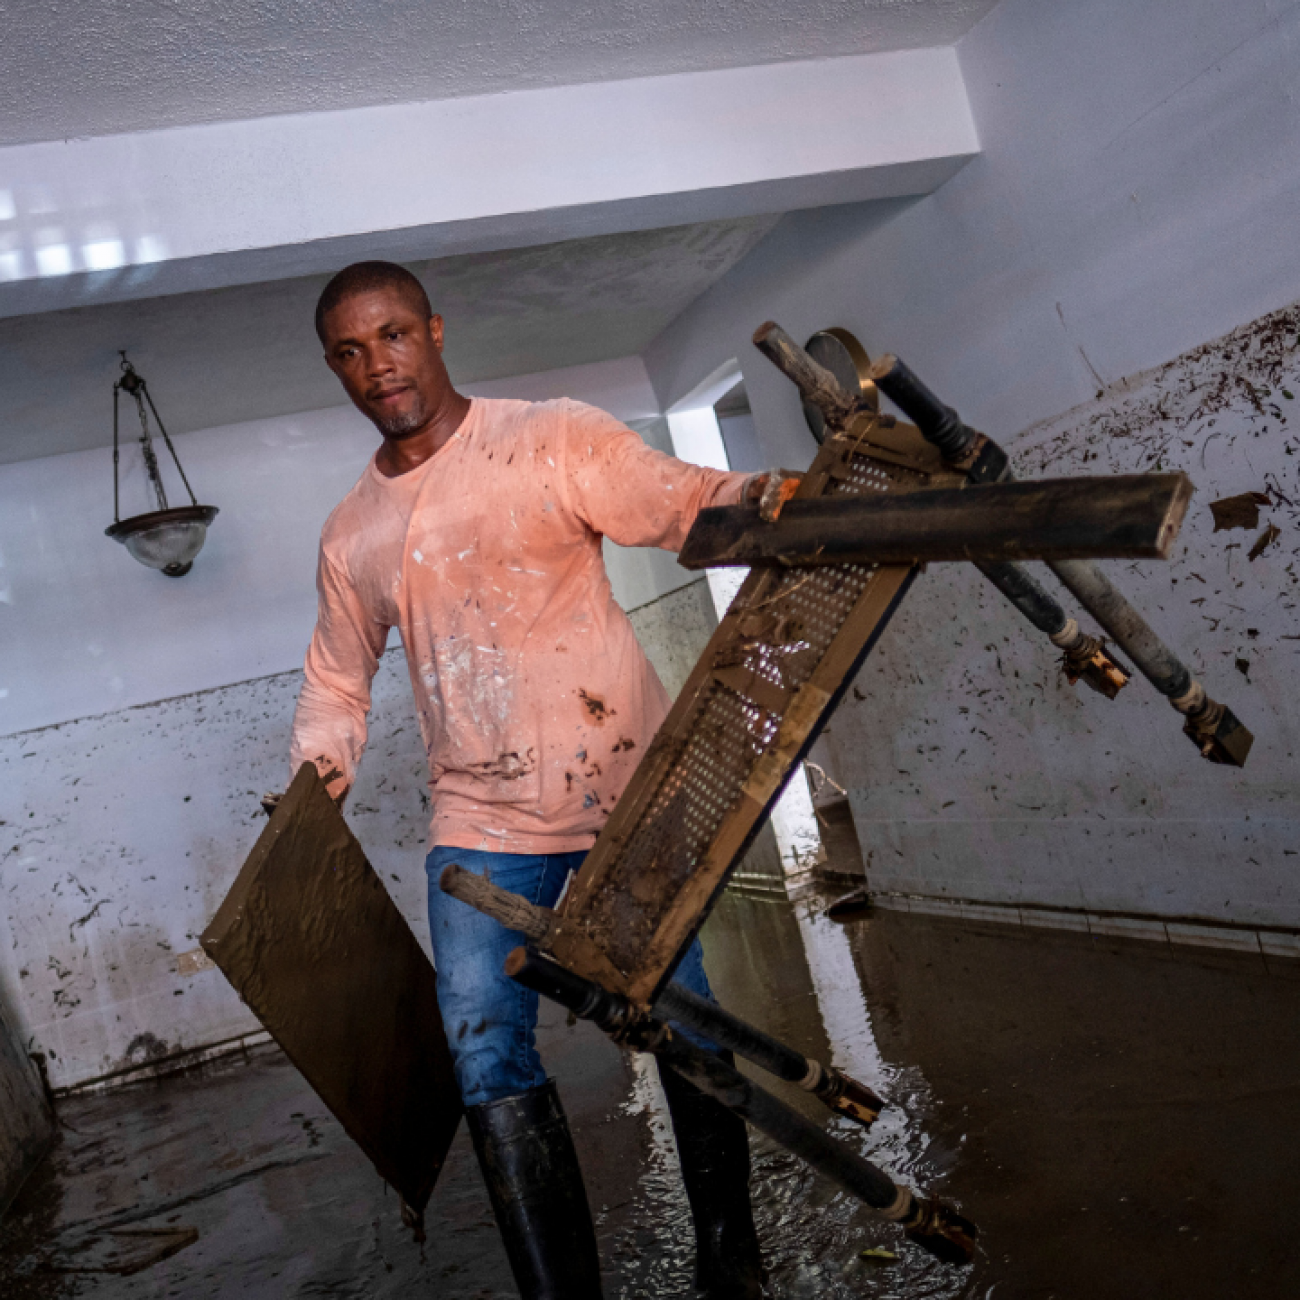 A man wades through knee-deep water in his home, carrying damaged furniture in the aftermath of Hurricane Fiona, in Toa Baja, Puerto Rico, on September 20, 2022. REUTERS/Ricardo Arduengo